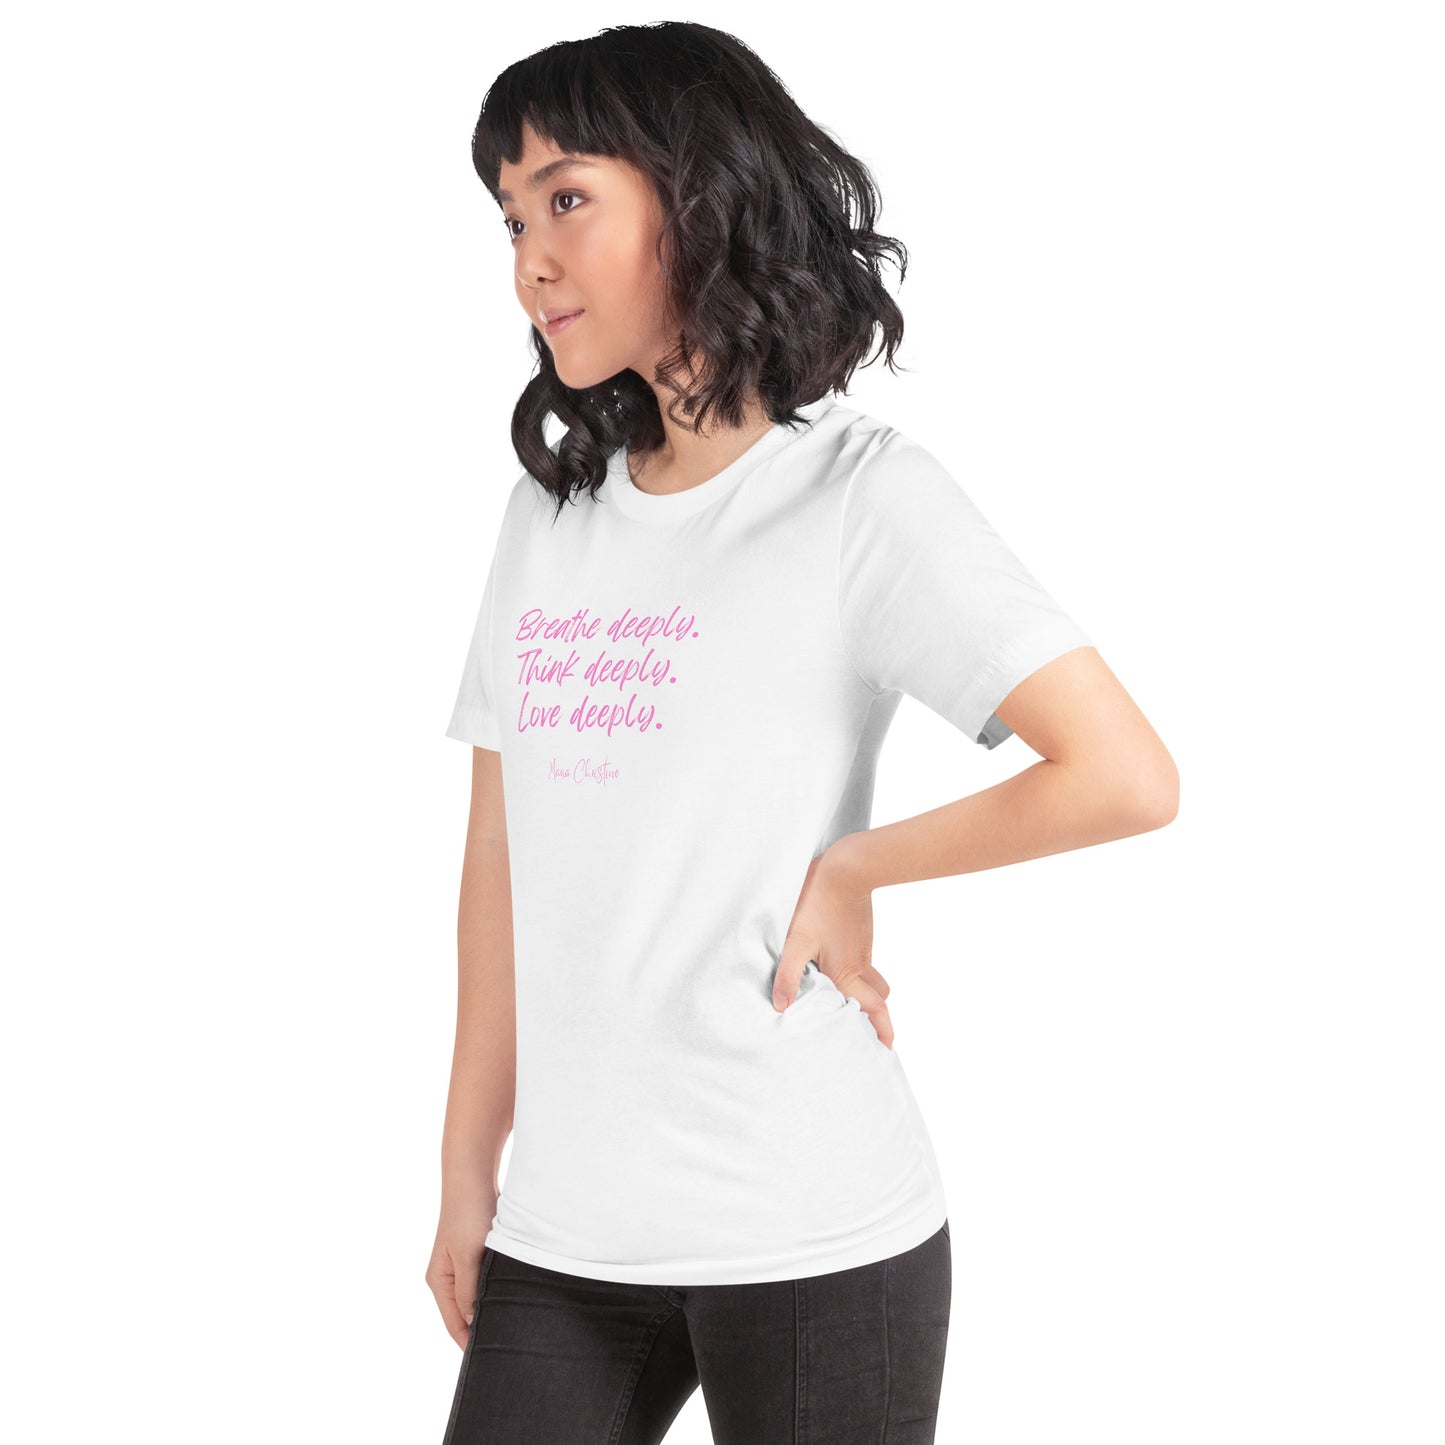 Unisex Tee: Breathe Deeply Quote (pink text)